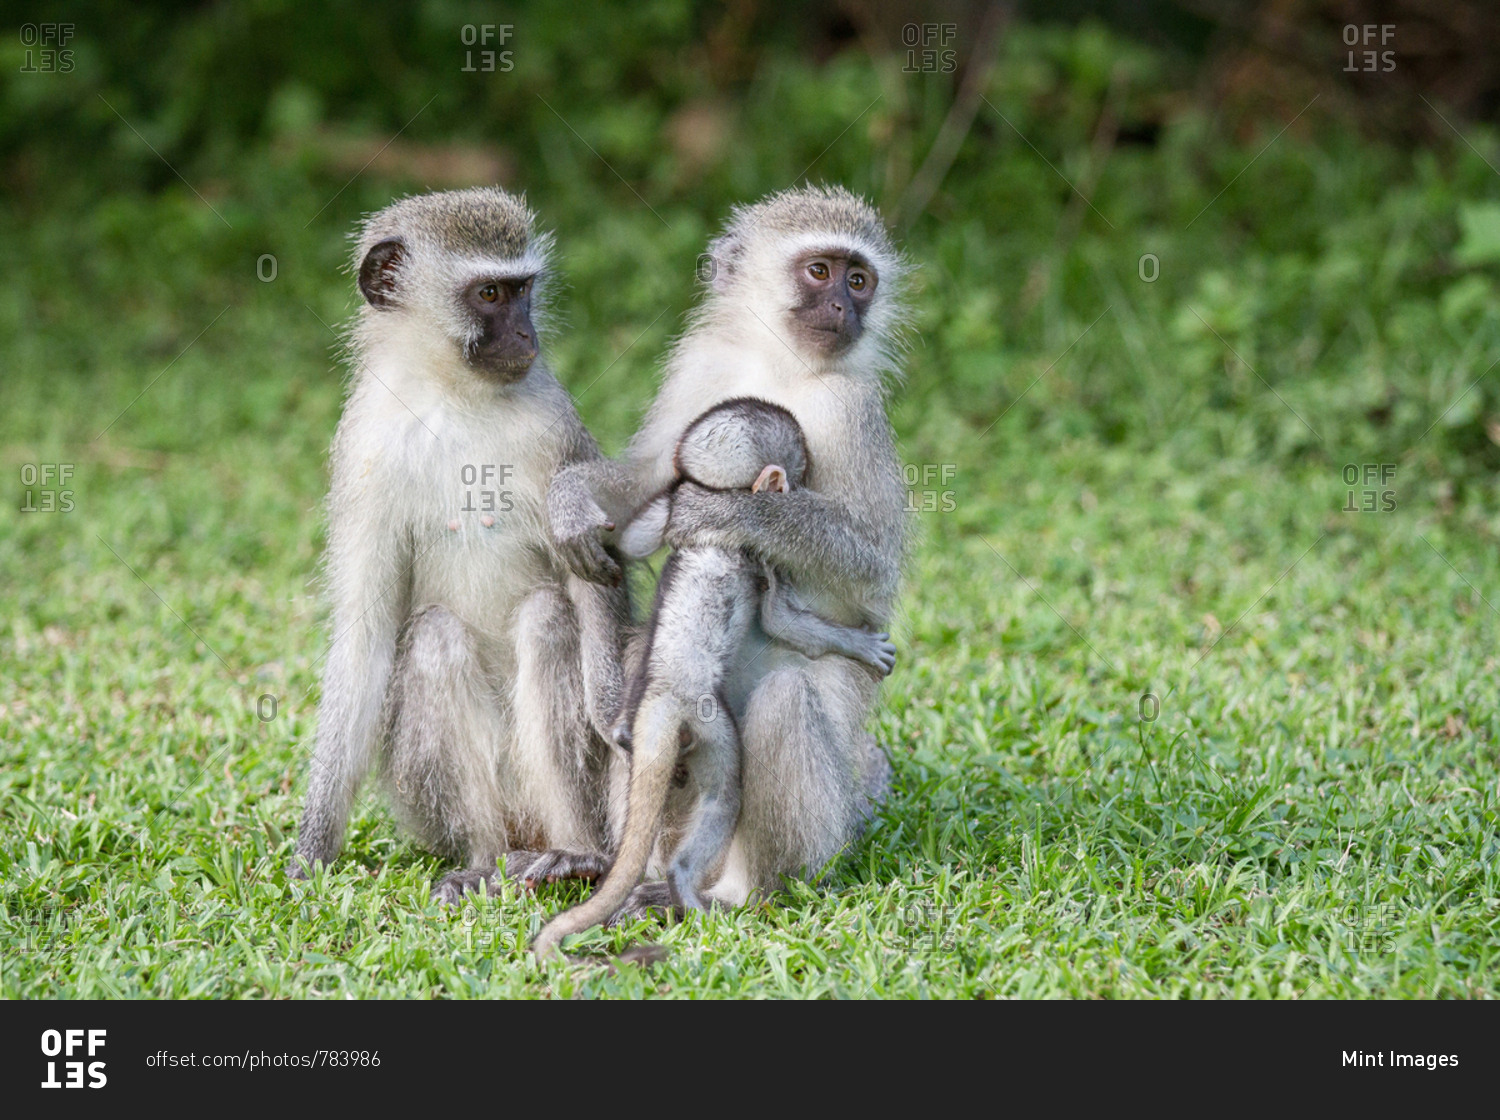 Vervet monkeys, Chlorocebus pygerythrus, sit upright in green short grass, looking away, mother hugging baby into chest